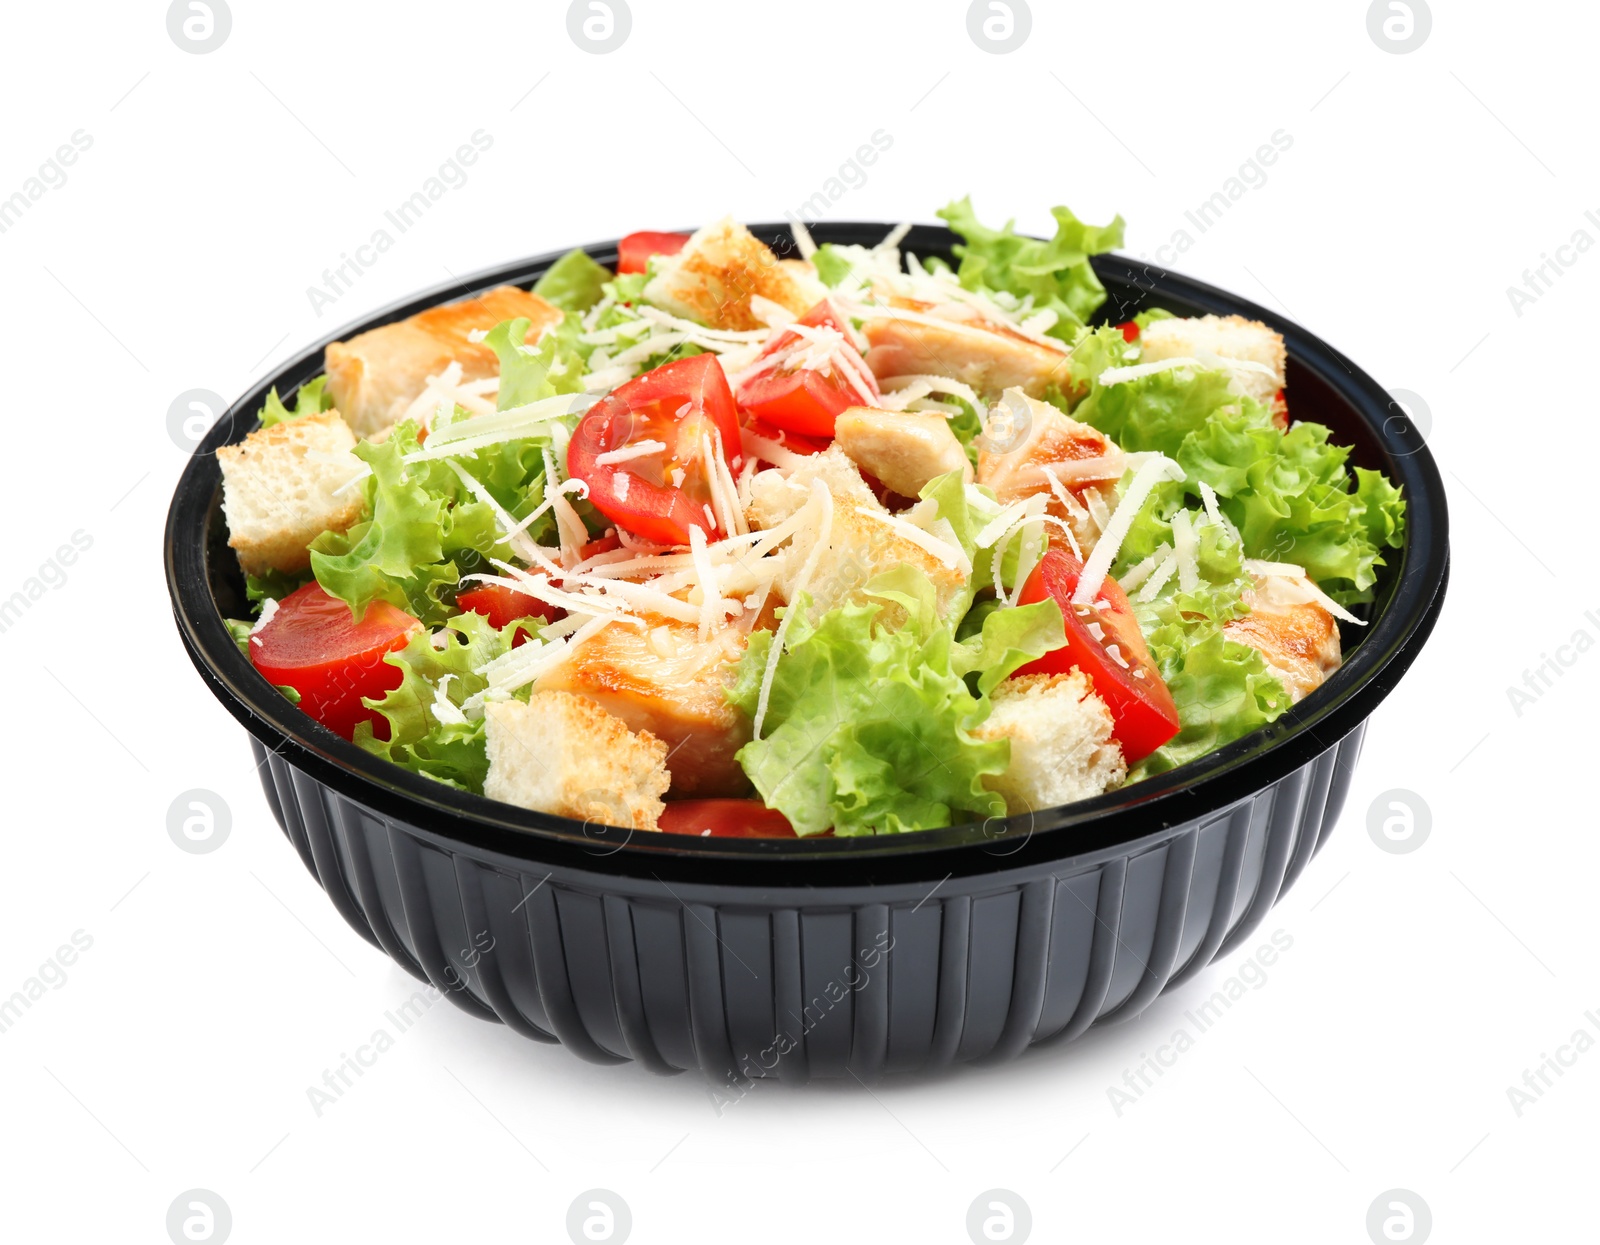 Image of Delicious fresh salad in plastic container on white background 